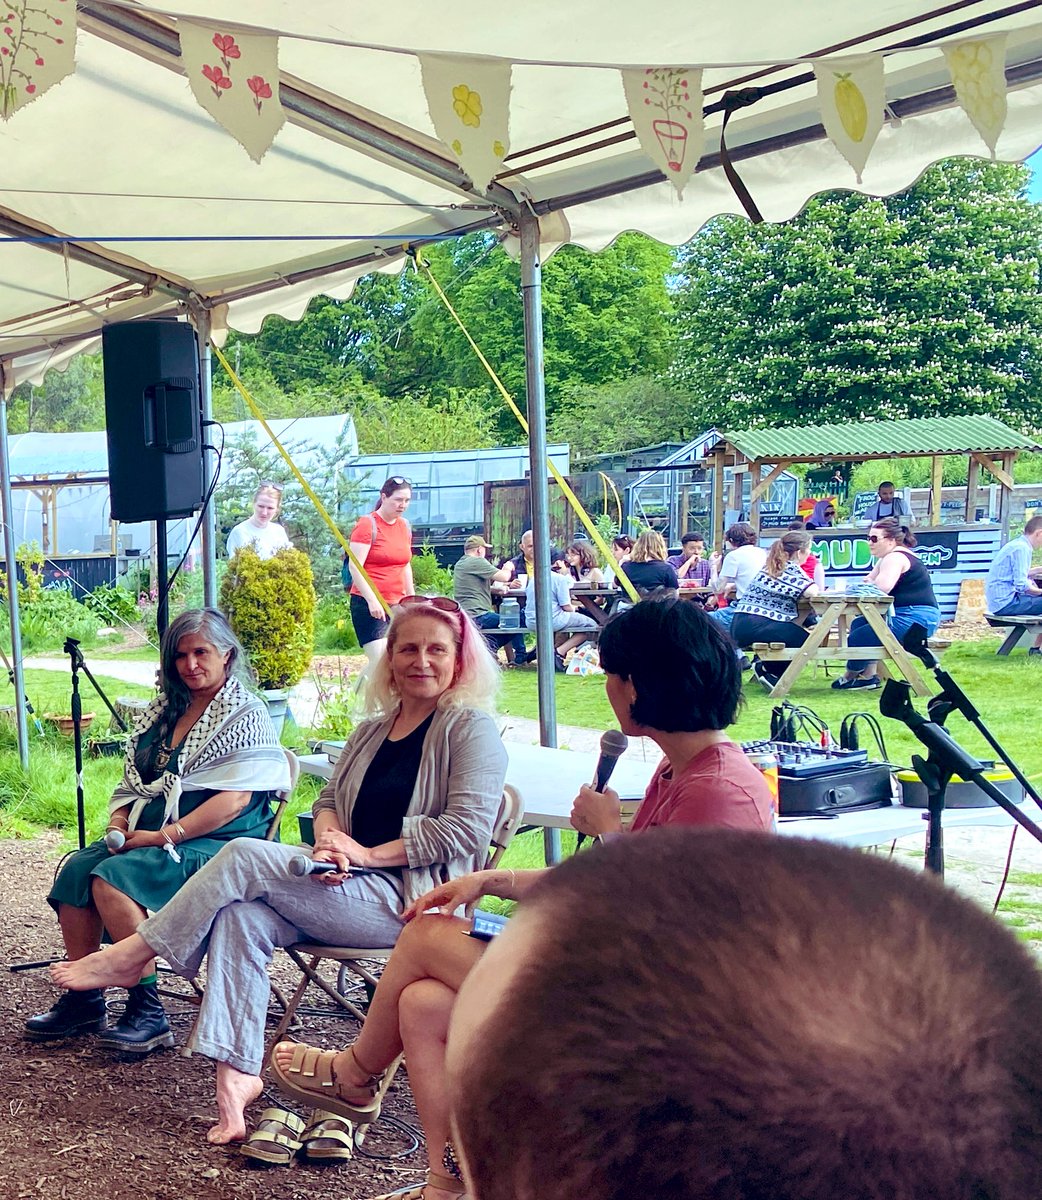 Thanks for a v inspiring event today at @MUD_CIC in Platt Fields Park, organisers @patagonia Manchester & @Right_2Roam with superb speakers @AmyJaneBeer & @dalkular1. #WildService book is a chorus of voices building 'a new culture that returns nature to the very heart of society”